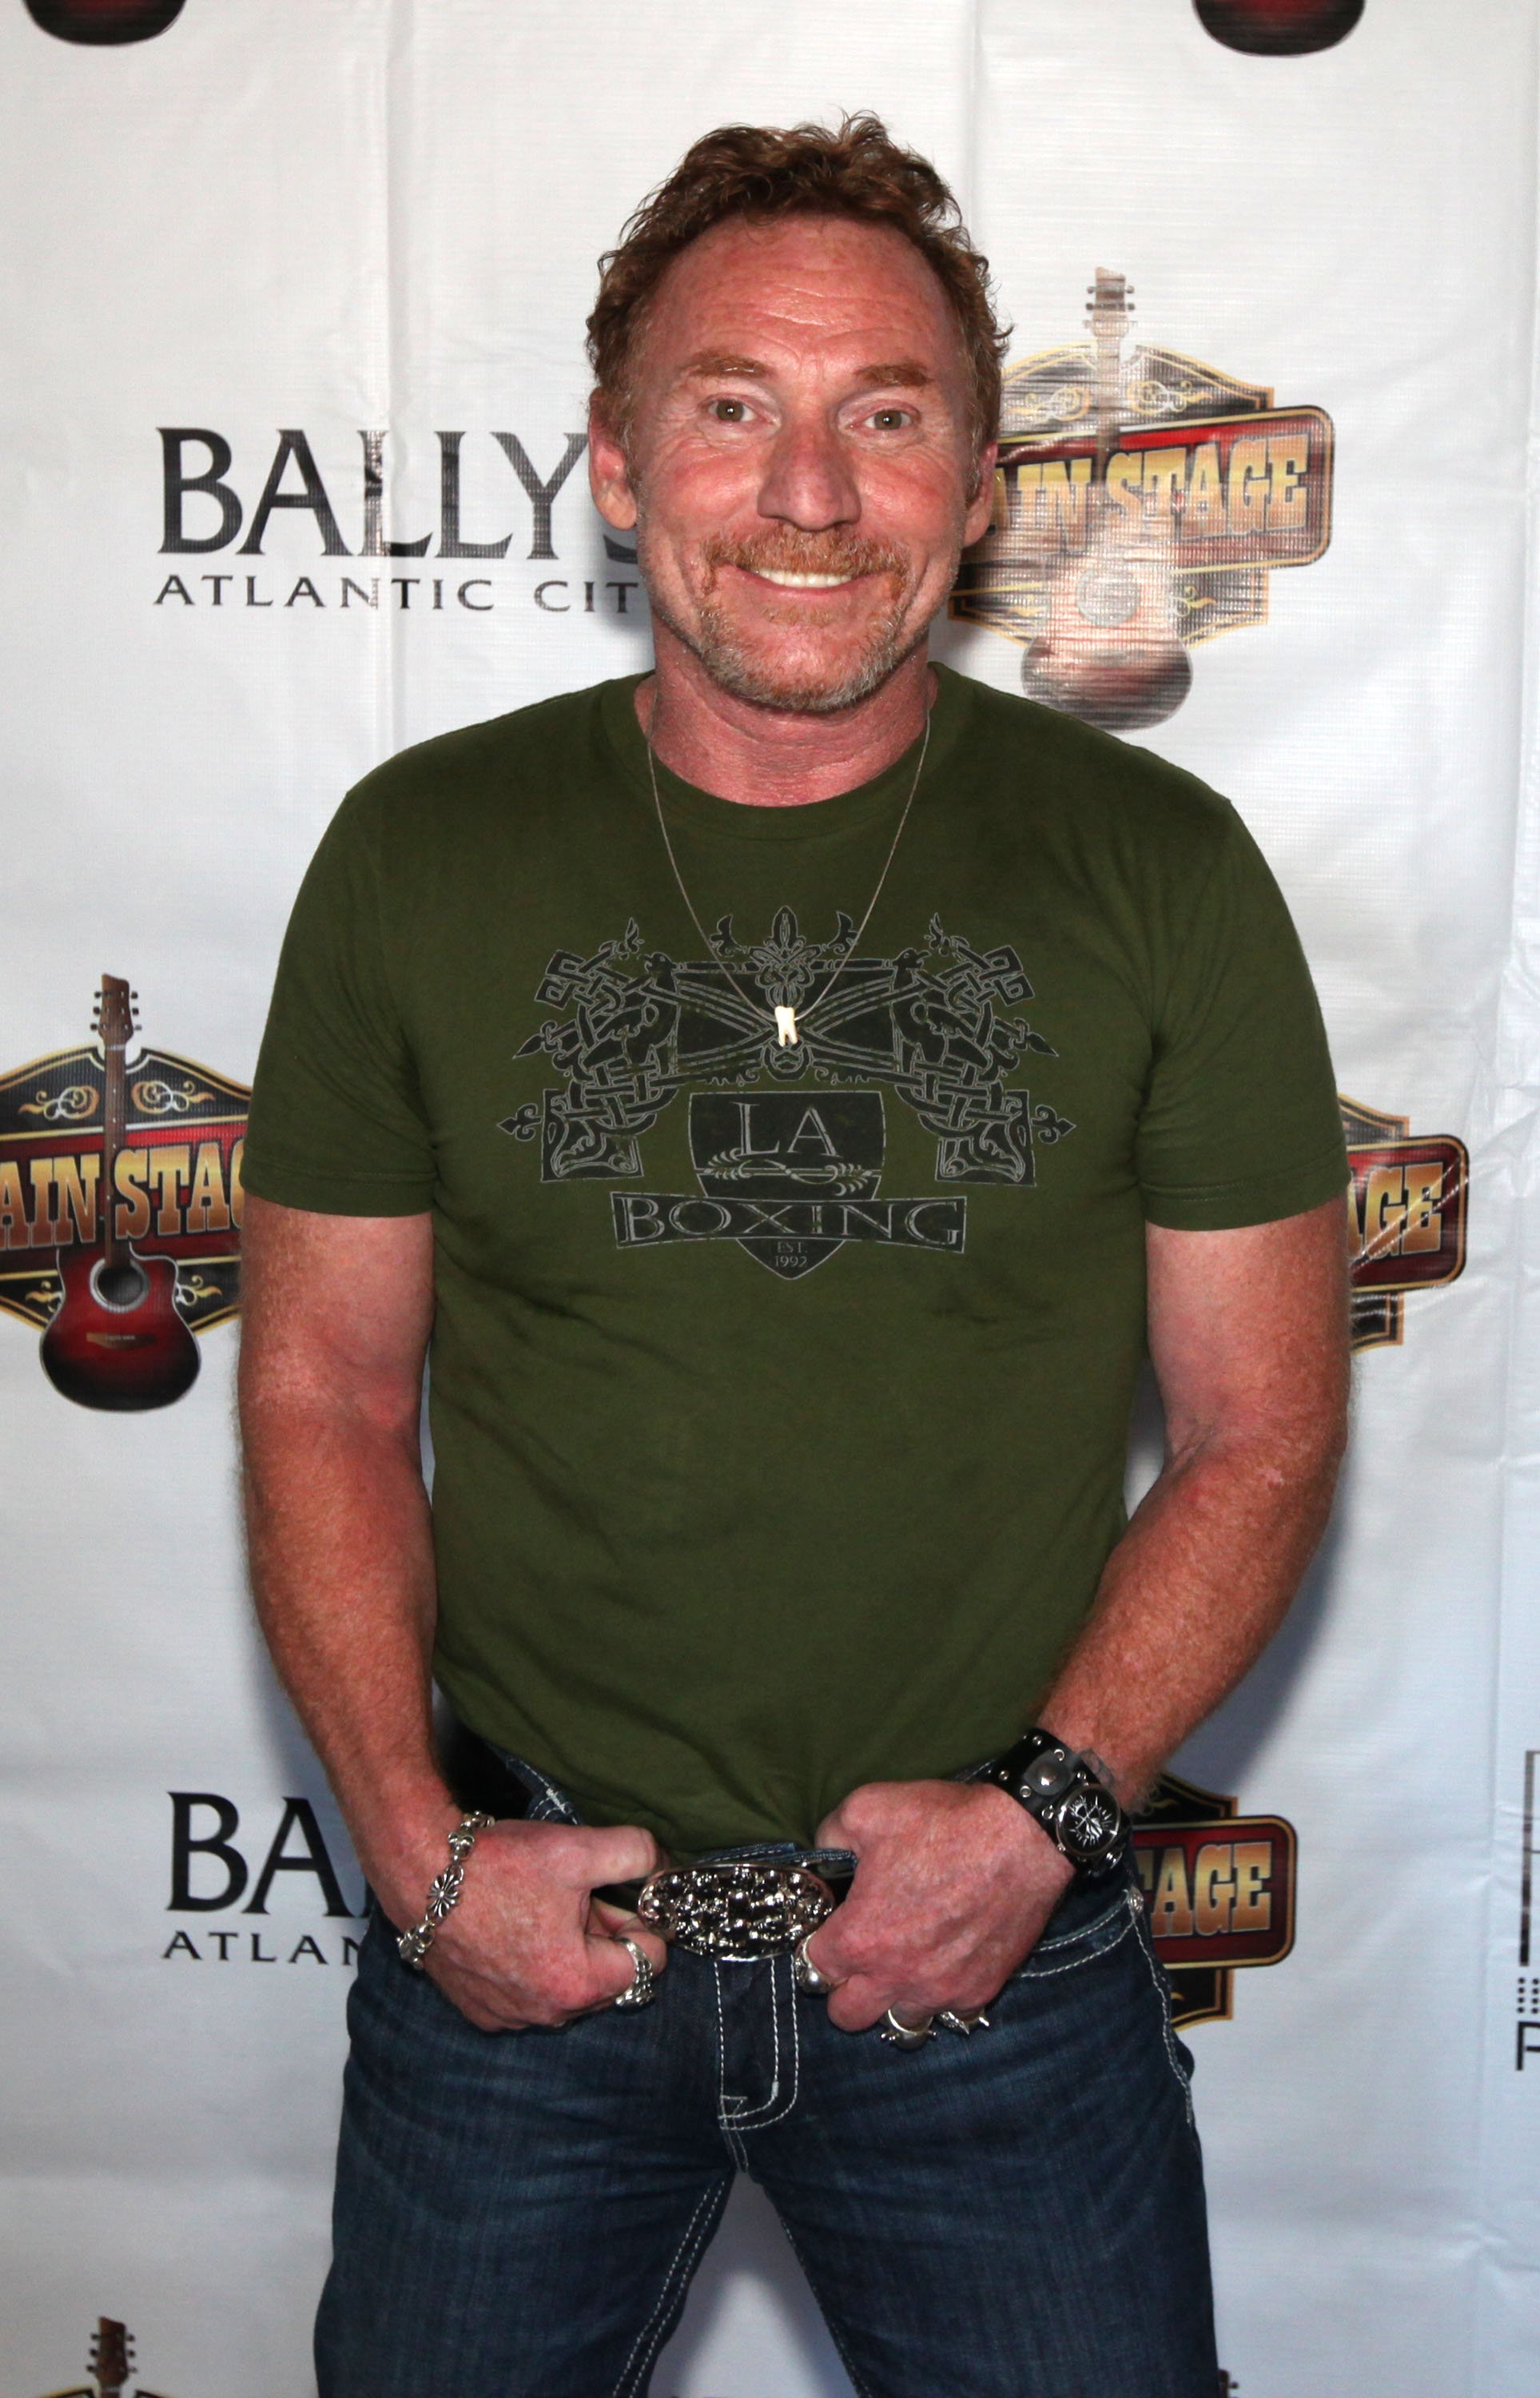 Danny Bonaduce attend the Battle of the Room Trashing Bands at Bally's Atlantic City on June 25, 2010 in Atlantic City | Photo: Getty Images